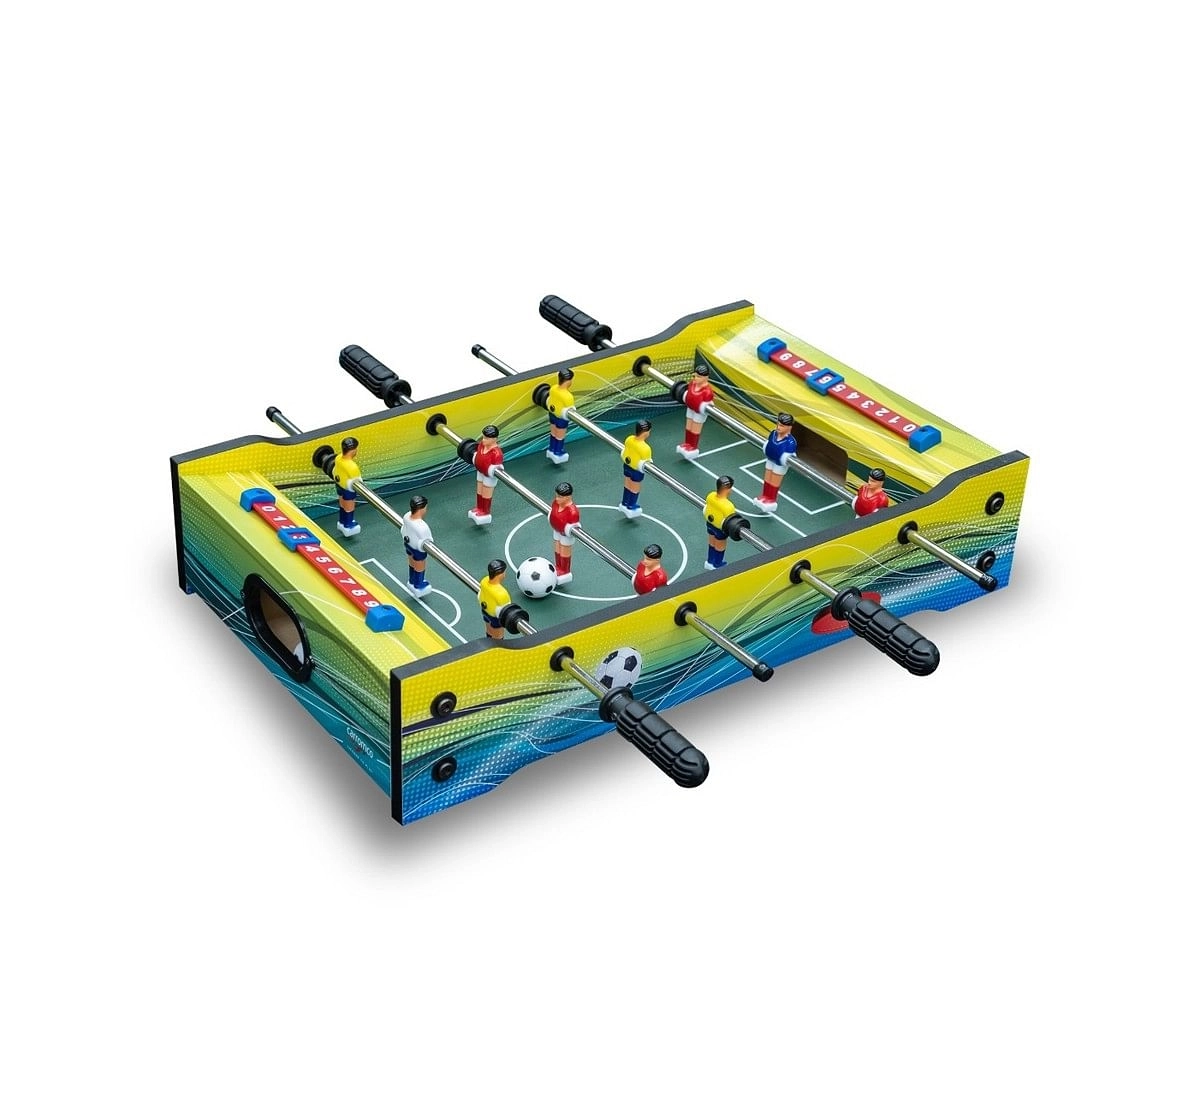 Carromco 51Cms 6-In-1 Table Game for Kids age 6Y+ 